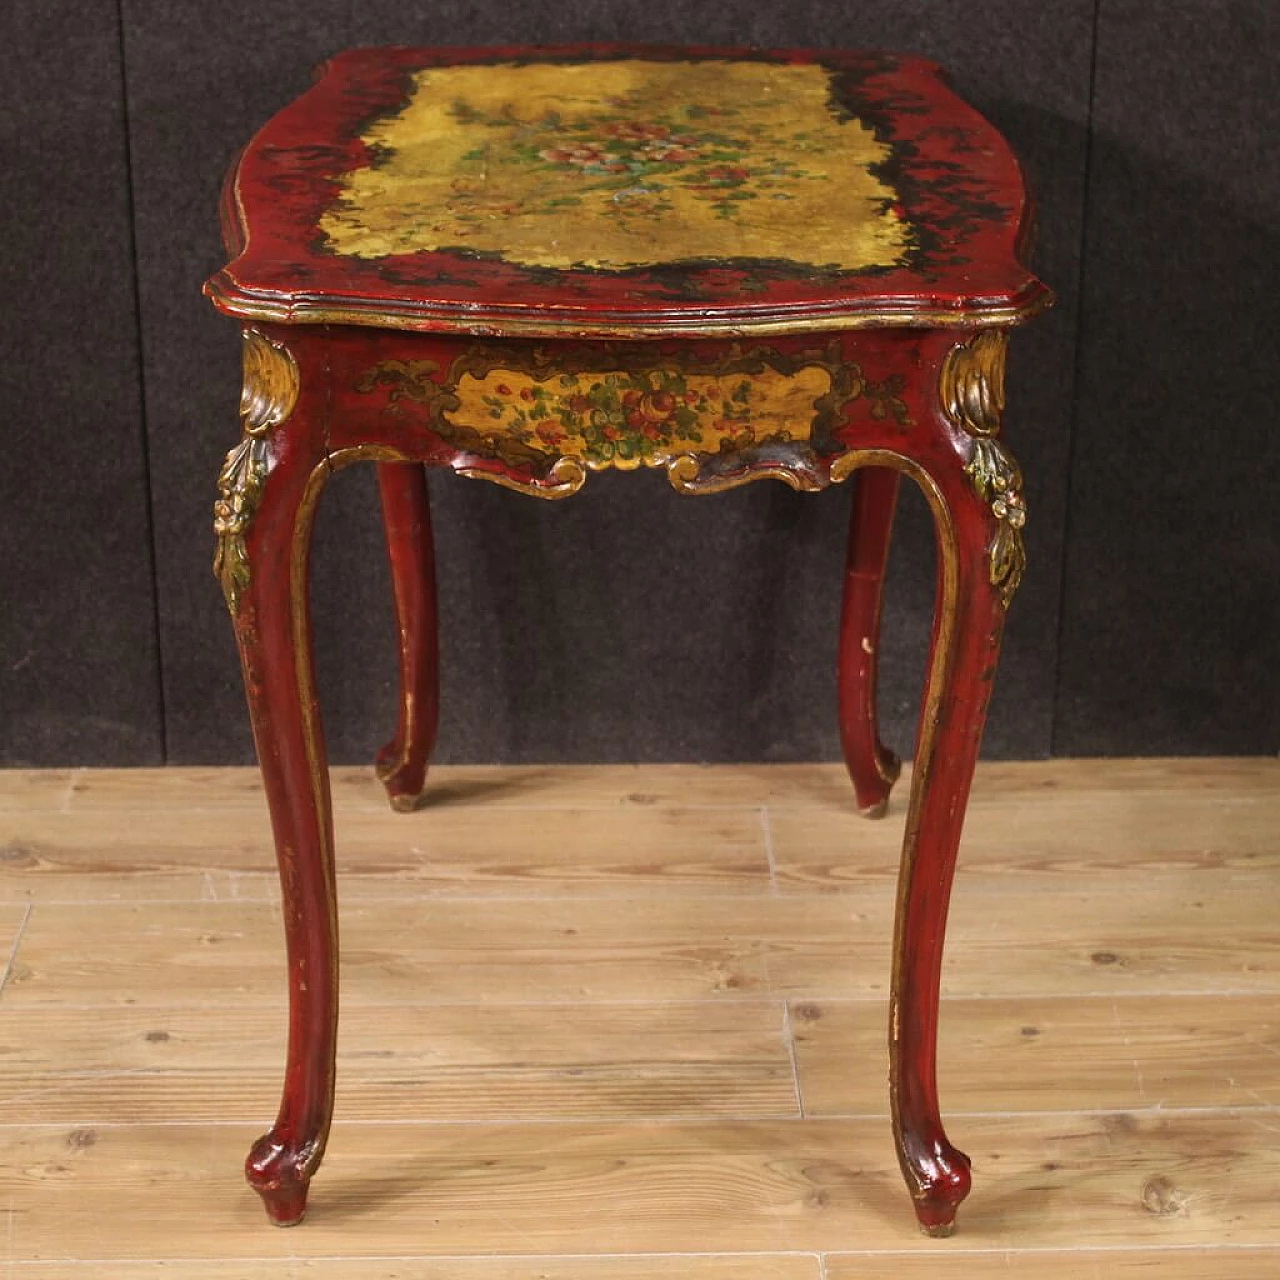 Venetian style lacquered and painted wood coffee table with floral motifs 3